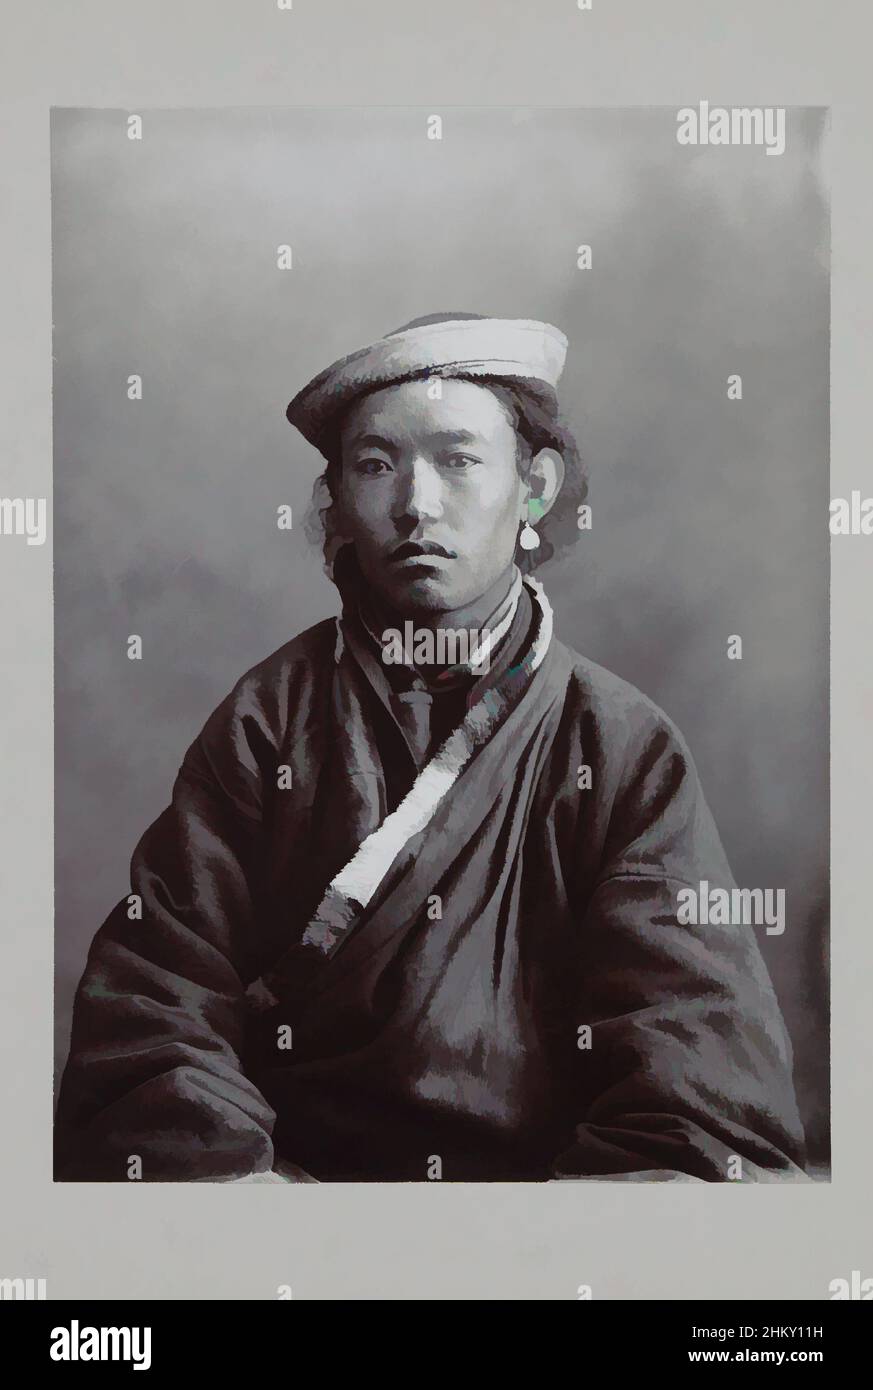 Art inspired by Portrait of a Tibetan man, The number 311 is on the bottom right., Theodor Paar, Darjiling, c. 1895 - c. 1915, paper, cardboard, height 201 mm × width 145 mmheight 244 mm × width 164 mm, Classic works modernized by Artotop with a splash of modernity. Shapes, color and value, eye-catching visual impact on art. Emotions through freedom of artworks in a contemporary way. A timeless message pursuing a wildly creative new direction. Artists turning to the digital medium and creating the Artotop NFT Stock Photo